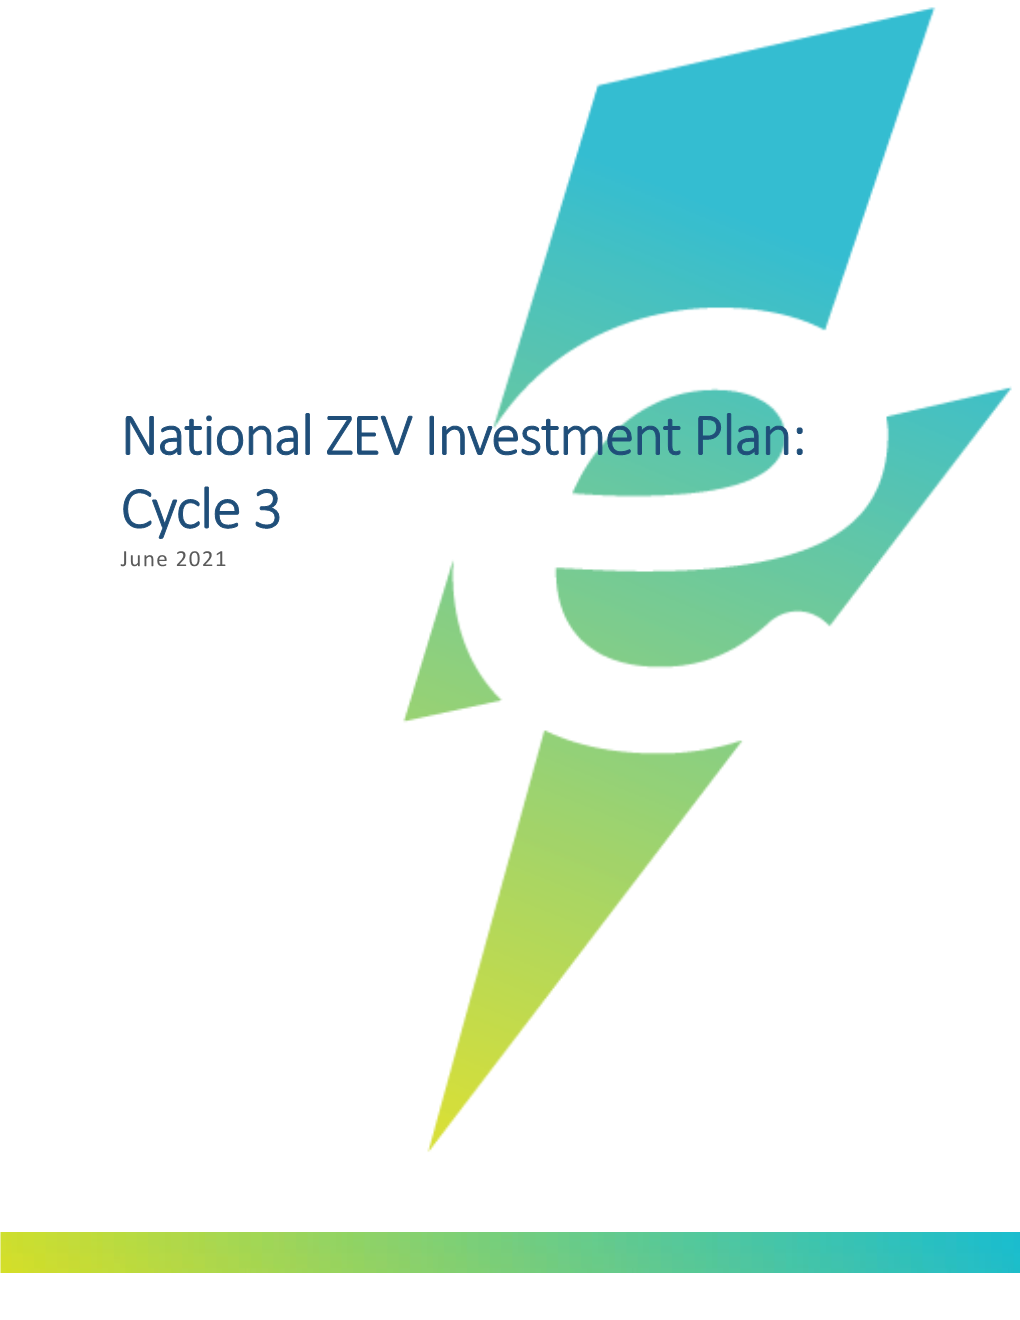 Cycle 3 National ZEV Investment Plan